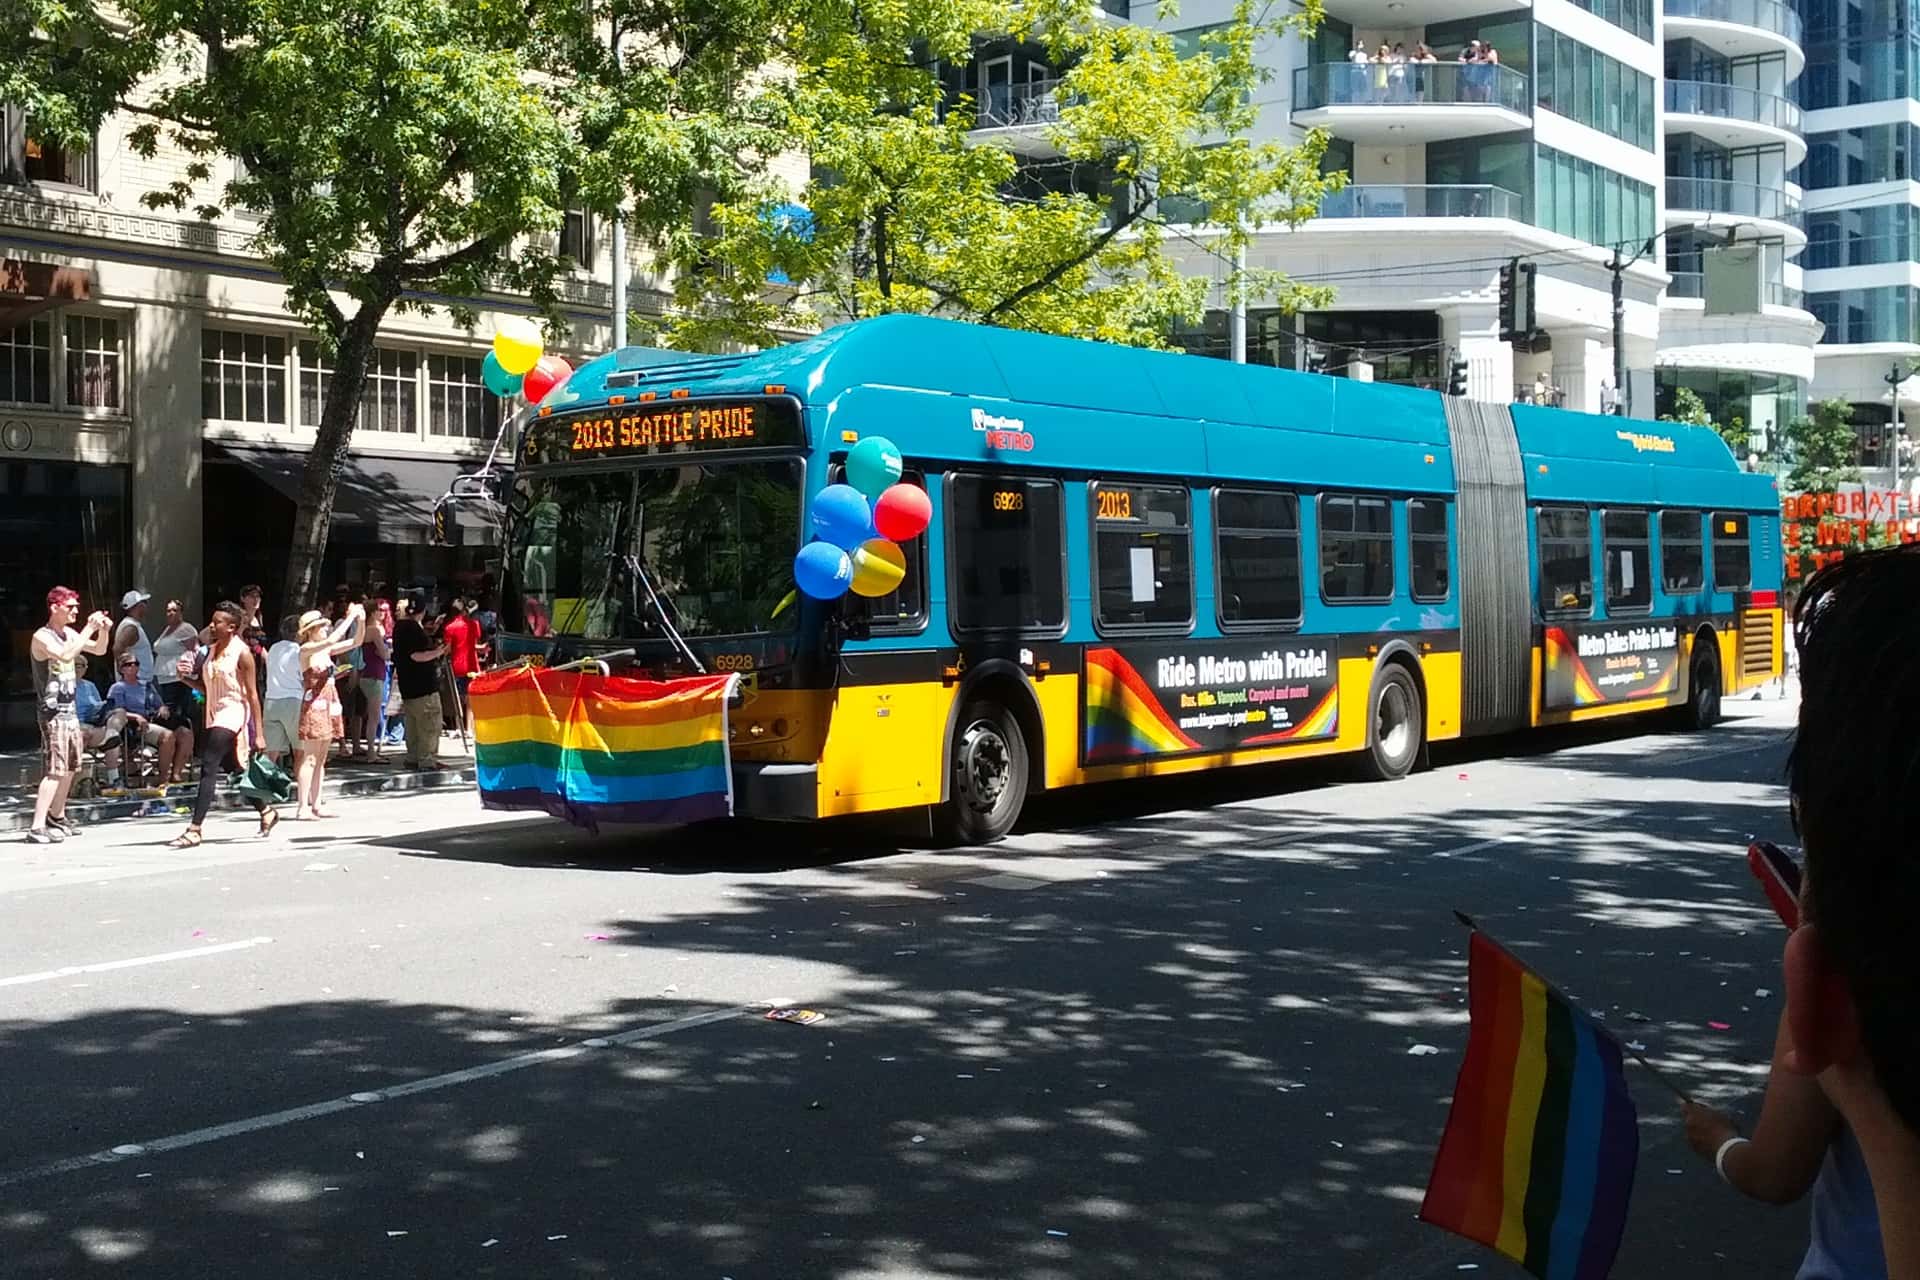 King County Metro bus in the Seattle Pride Parade